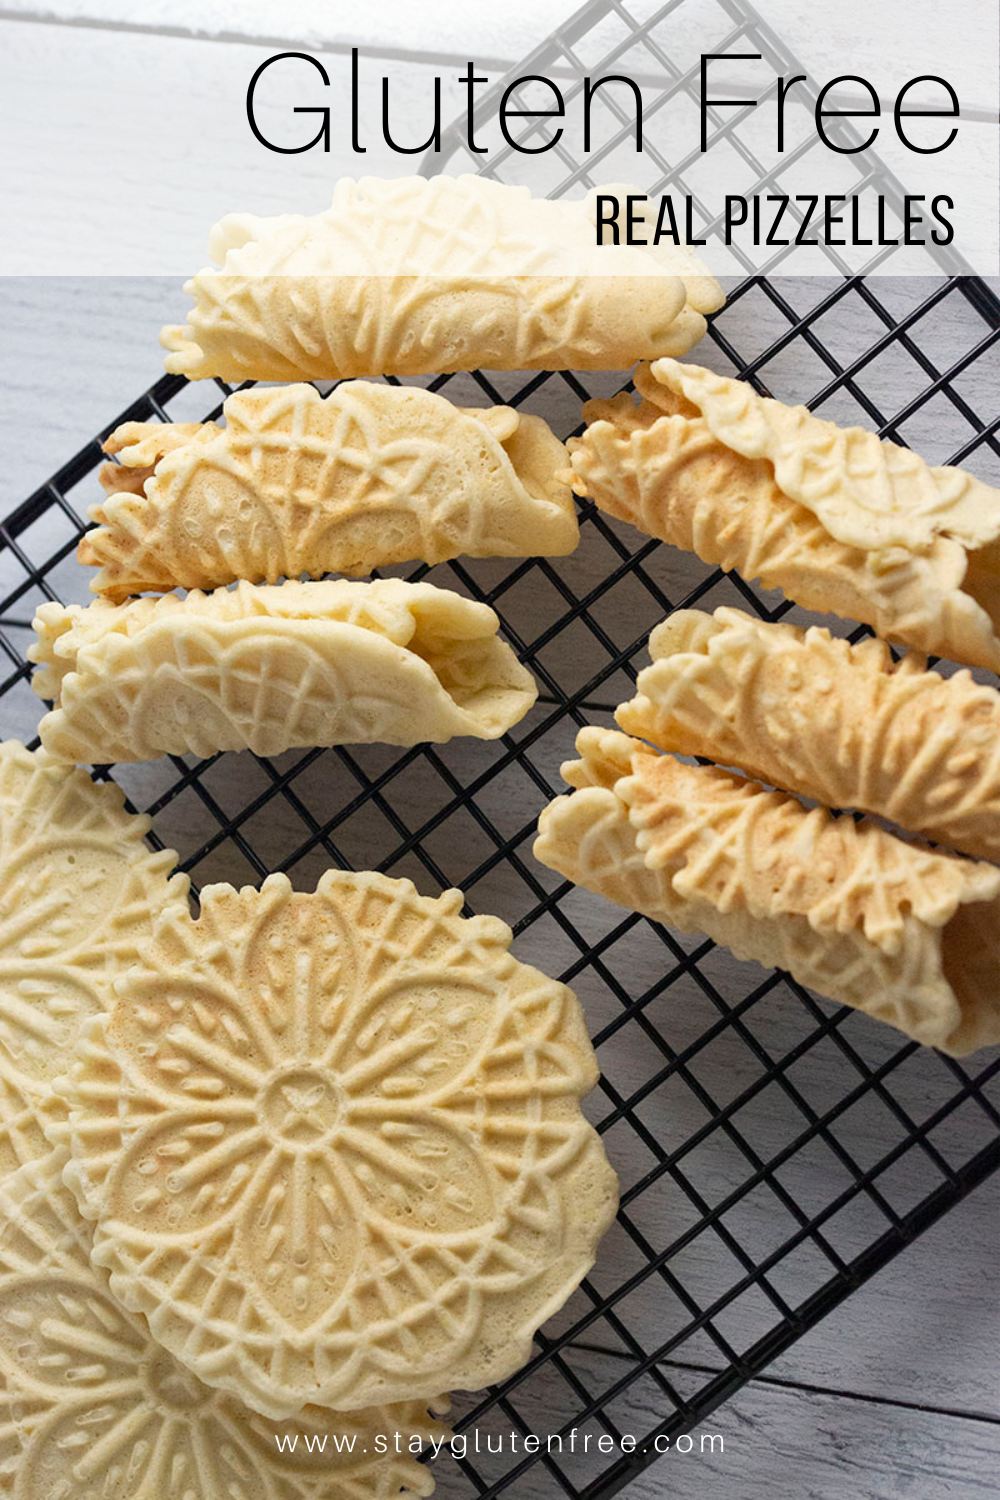 Real Pizzelles